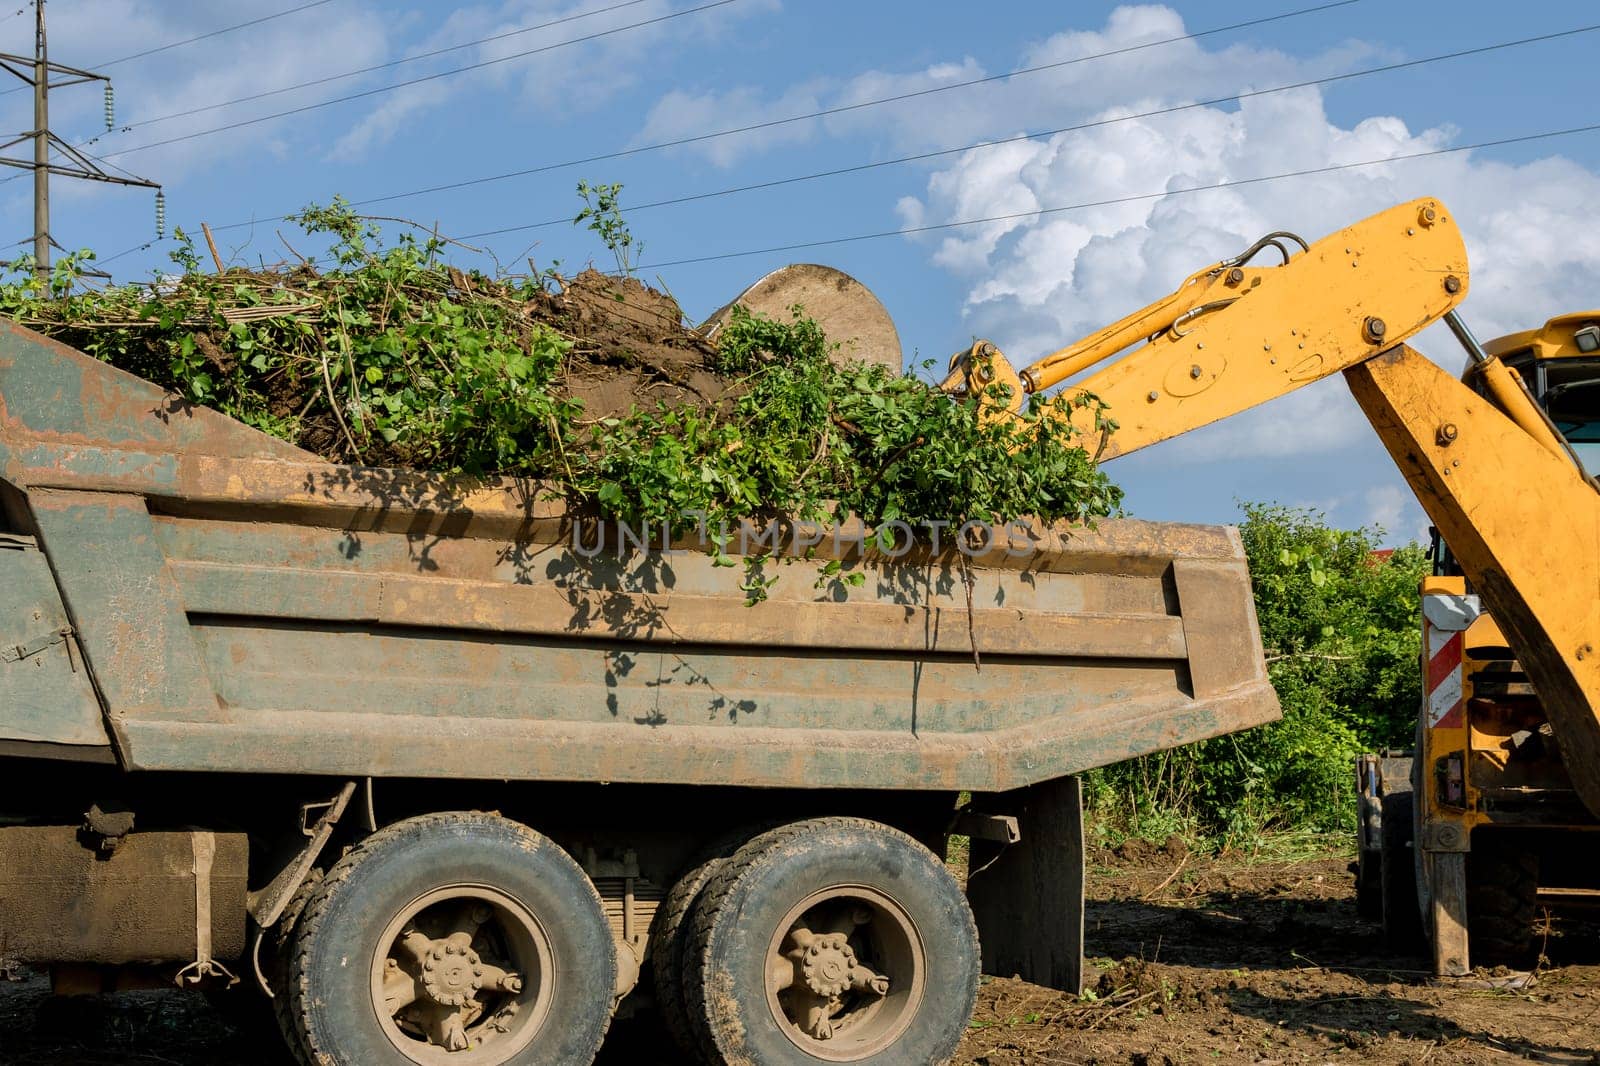 Excavator's powerful bucket dumps bushes and trees onto trailer. Clearing construction sites.